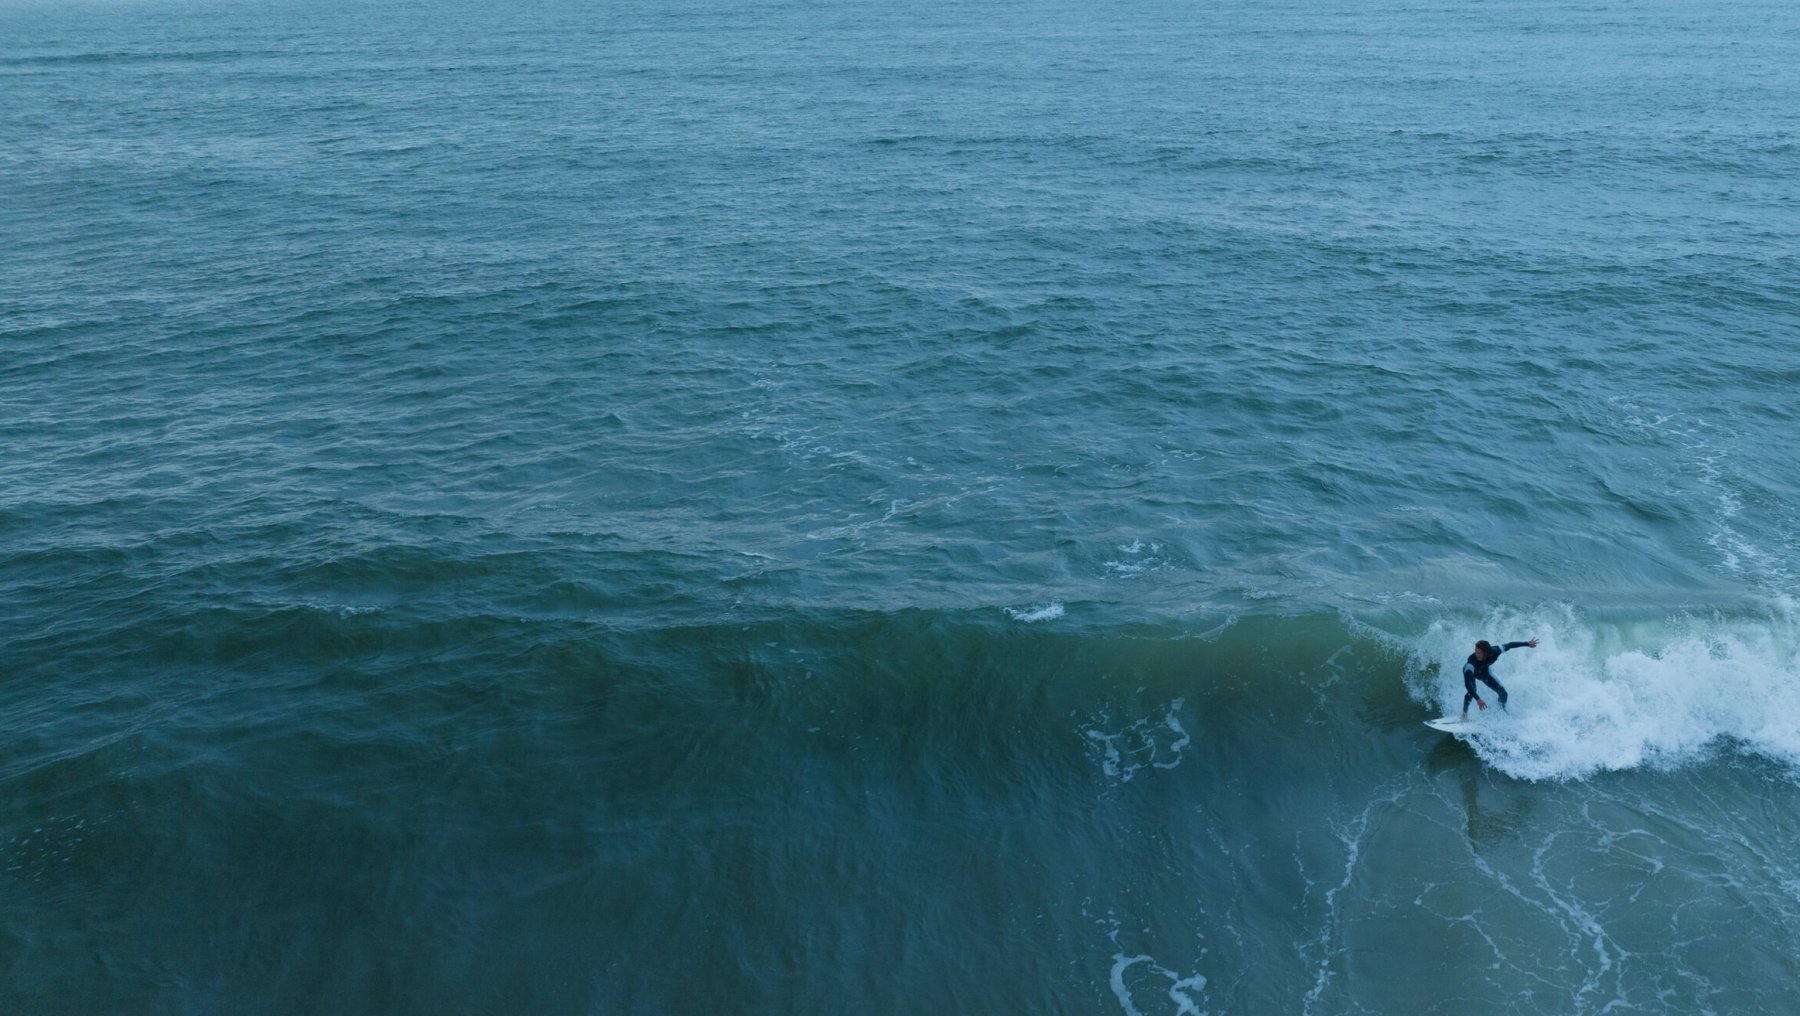 A person surfing in the ocean